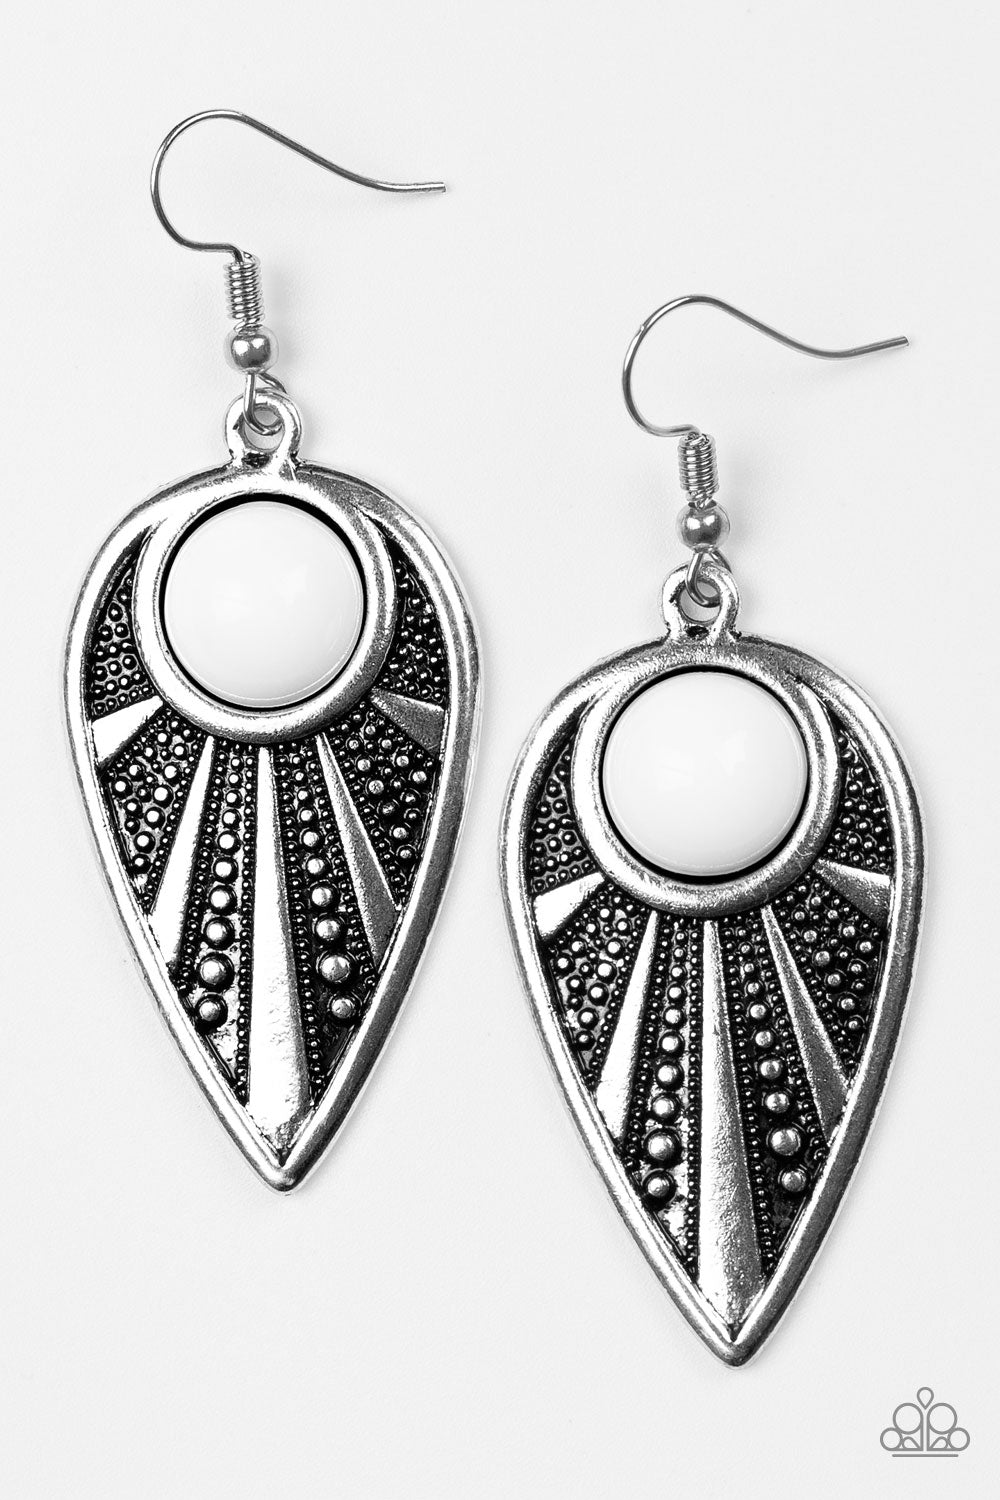 silver, silver jewelry, earrings, fish hook earrings, affordable jewelry, affordable holiday gift, everyday jewelry, paparazzi accessories, jewelry stores, jewelry stores near me, viral jewelry, trending jewlery, casual jewelry, white, white jewelry, beaded jewelry, 